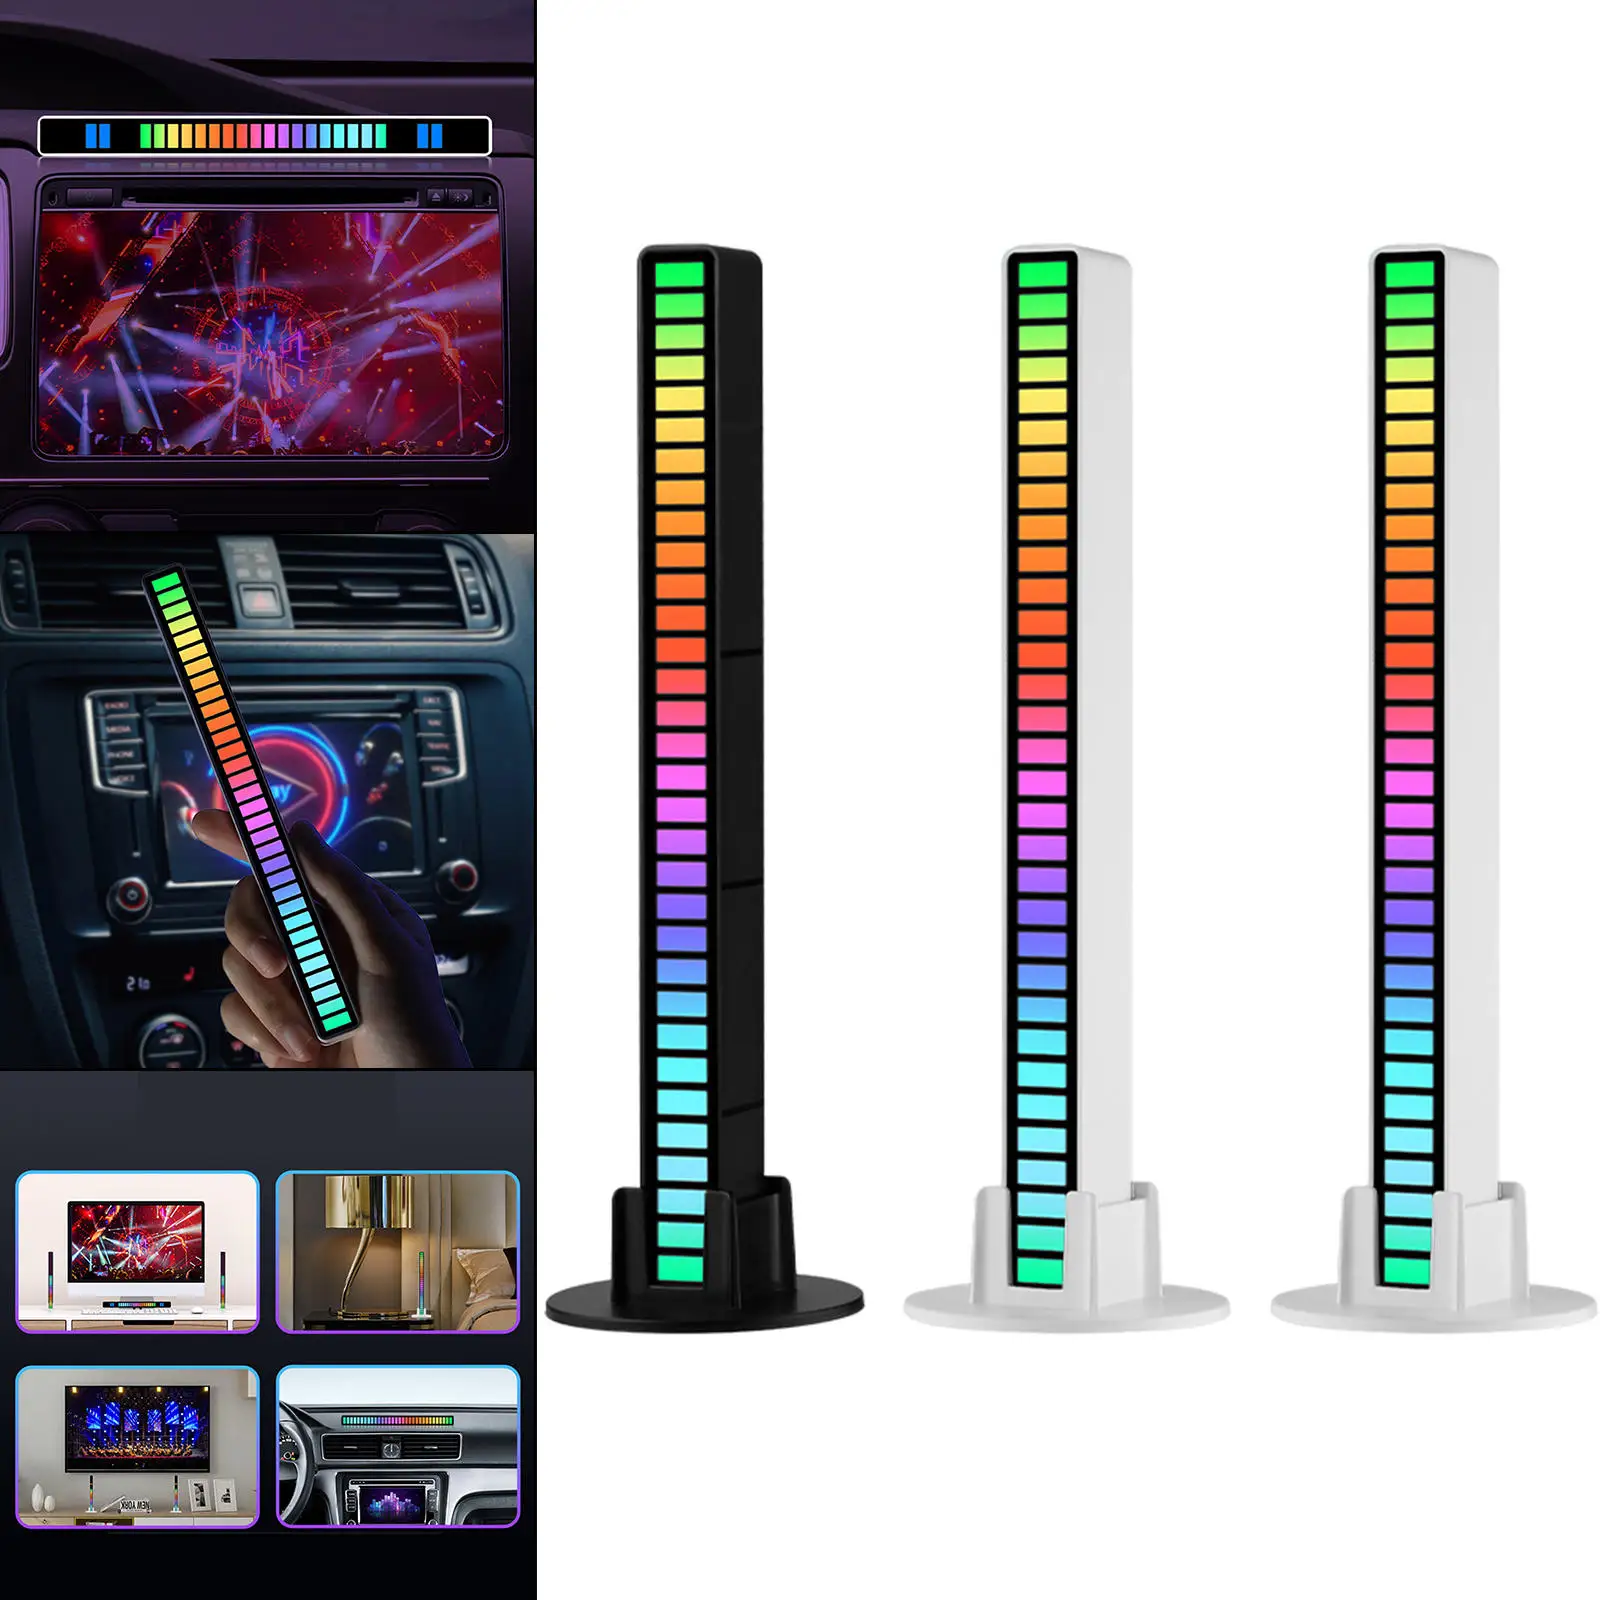 Sound Control RGB Light Pickup Rhythm Night Lamp Atmosphere Lights Fairy Lights Plug and Play 18 Color Change USB for Party